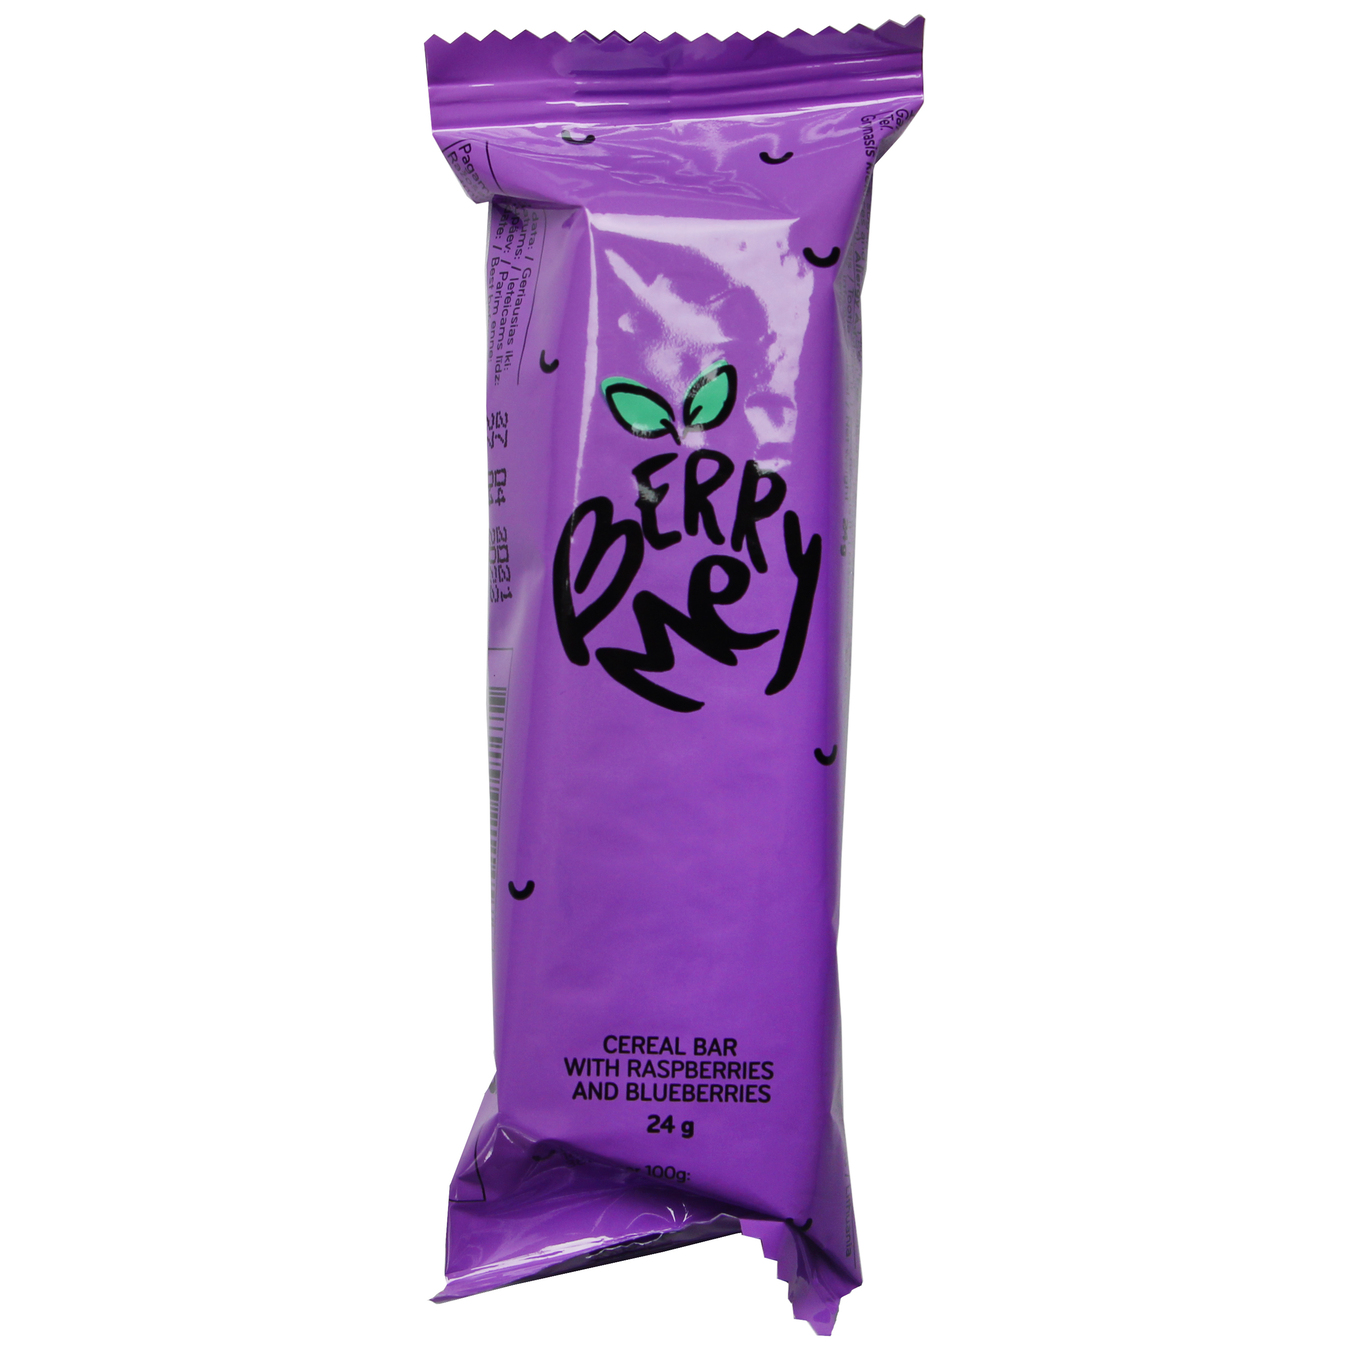 OHO Berry Me With Rasperry And Bilberry Cereal Bar 24g